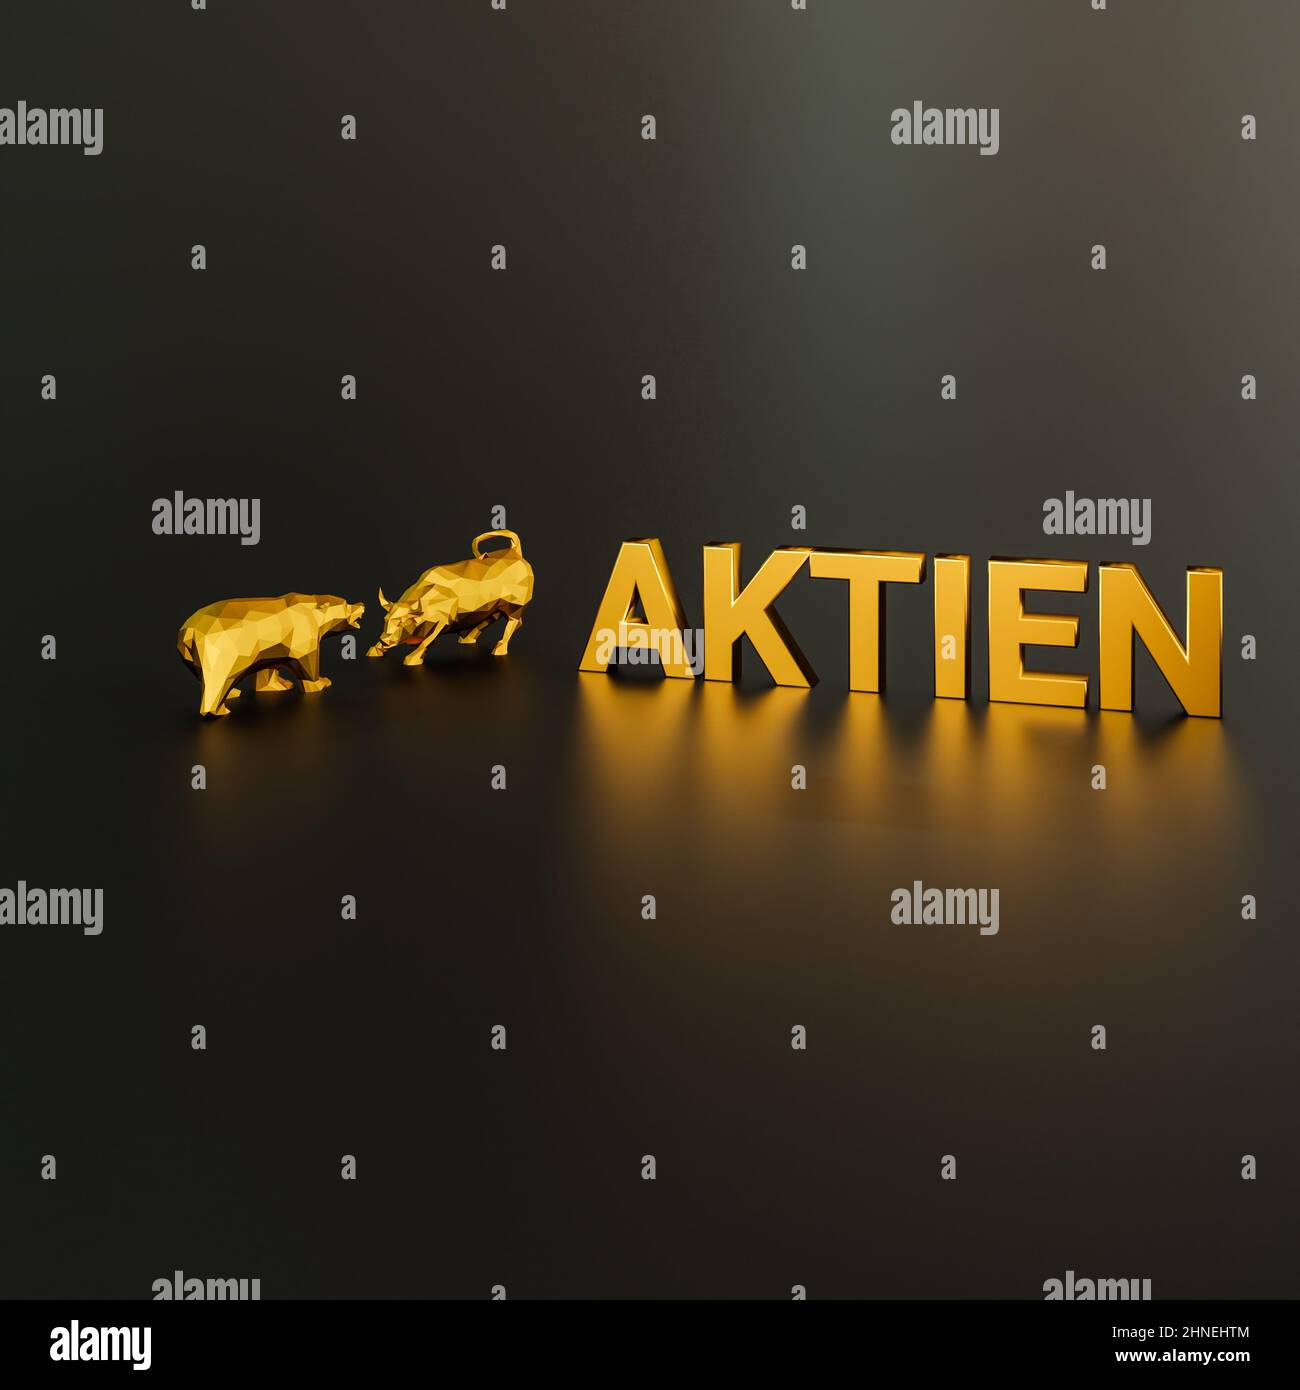 German word Aktien (Shares) concept. A bull and bear besides the golden text Aktien. Stock Photo